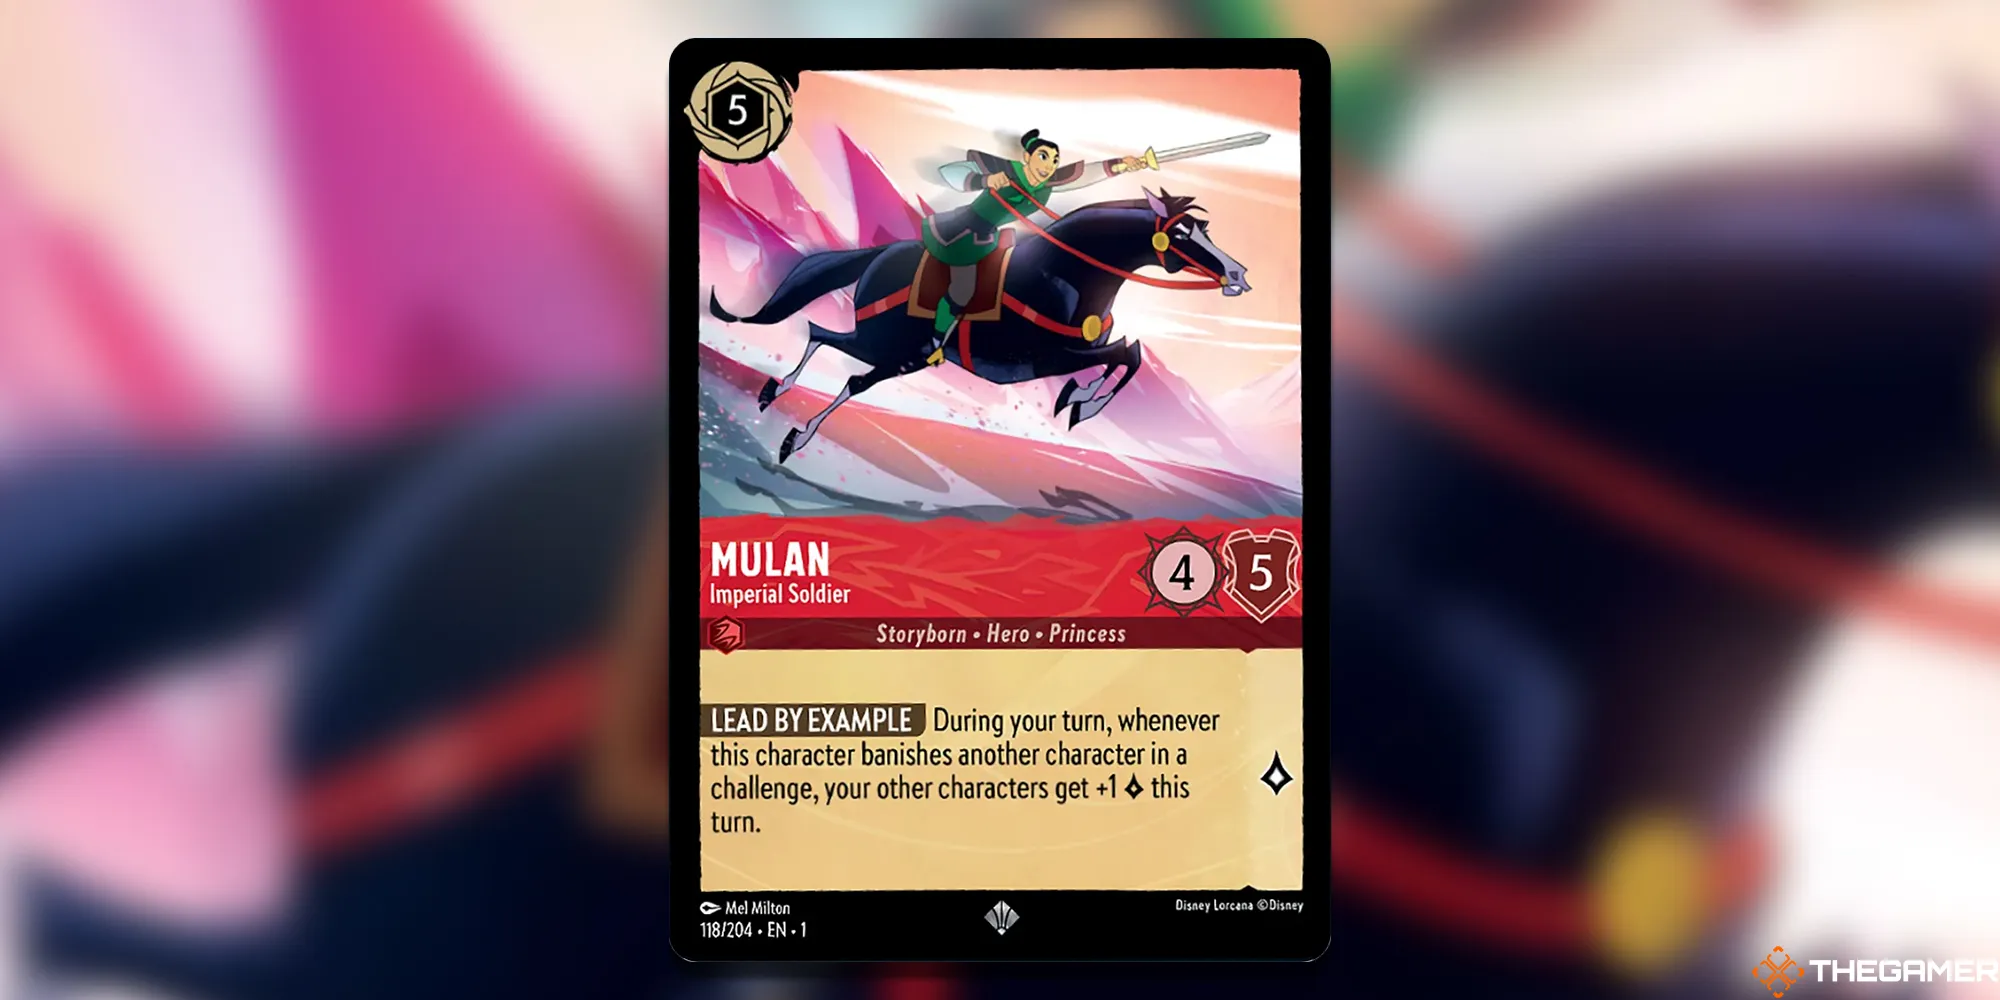 Mulan, Imperial Soldier